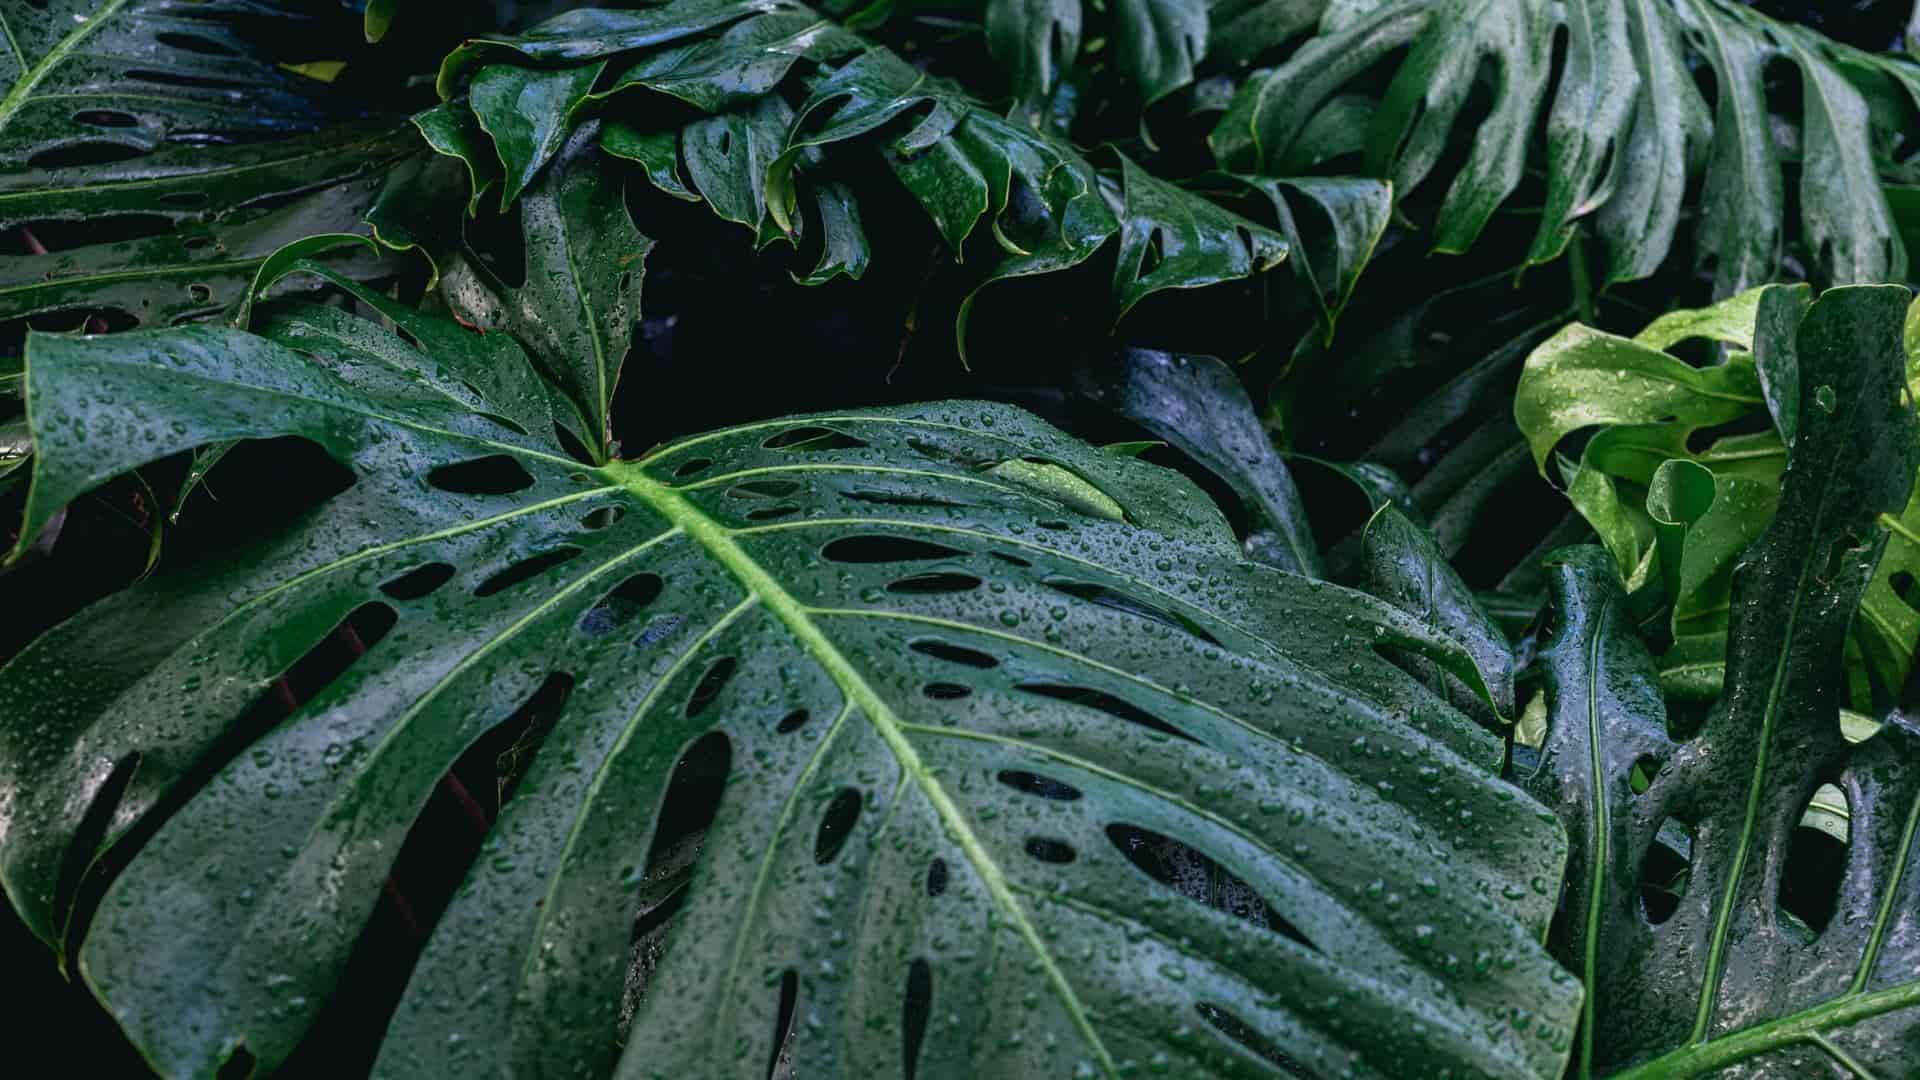 A bush of large monstera leaves has beads of water all over them.